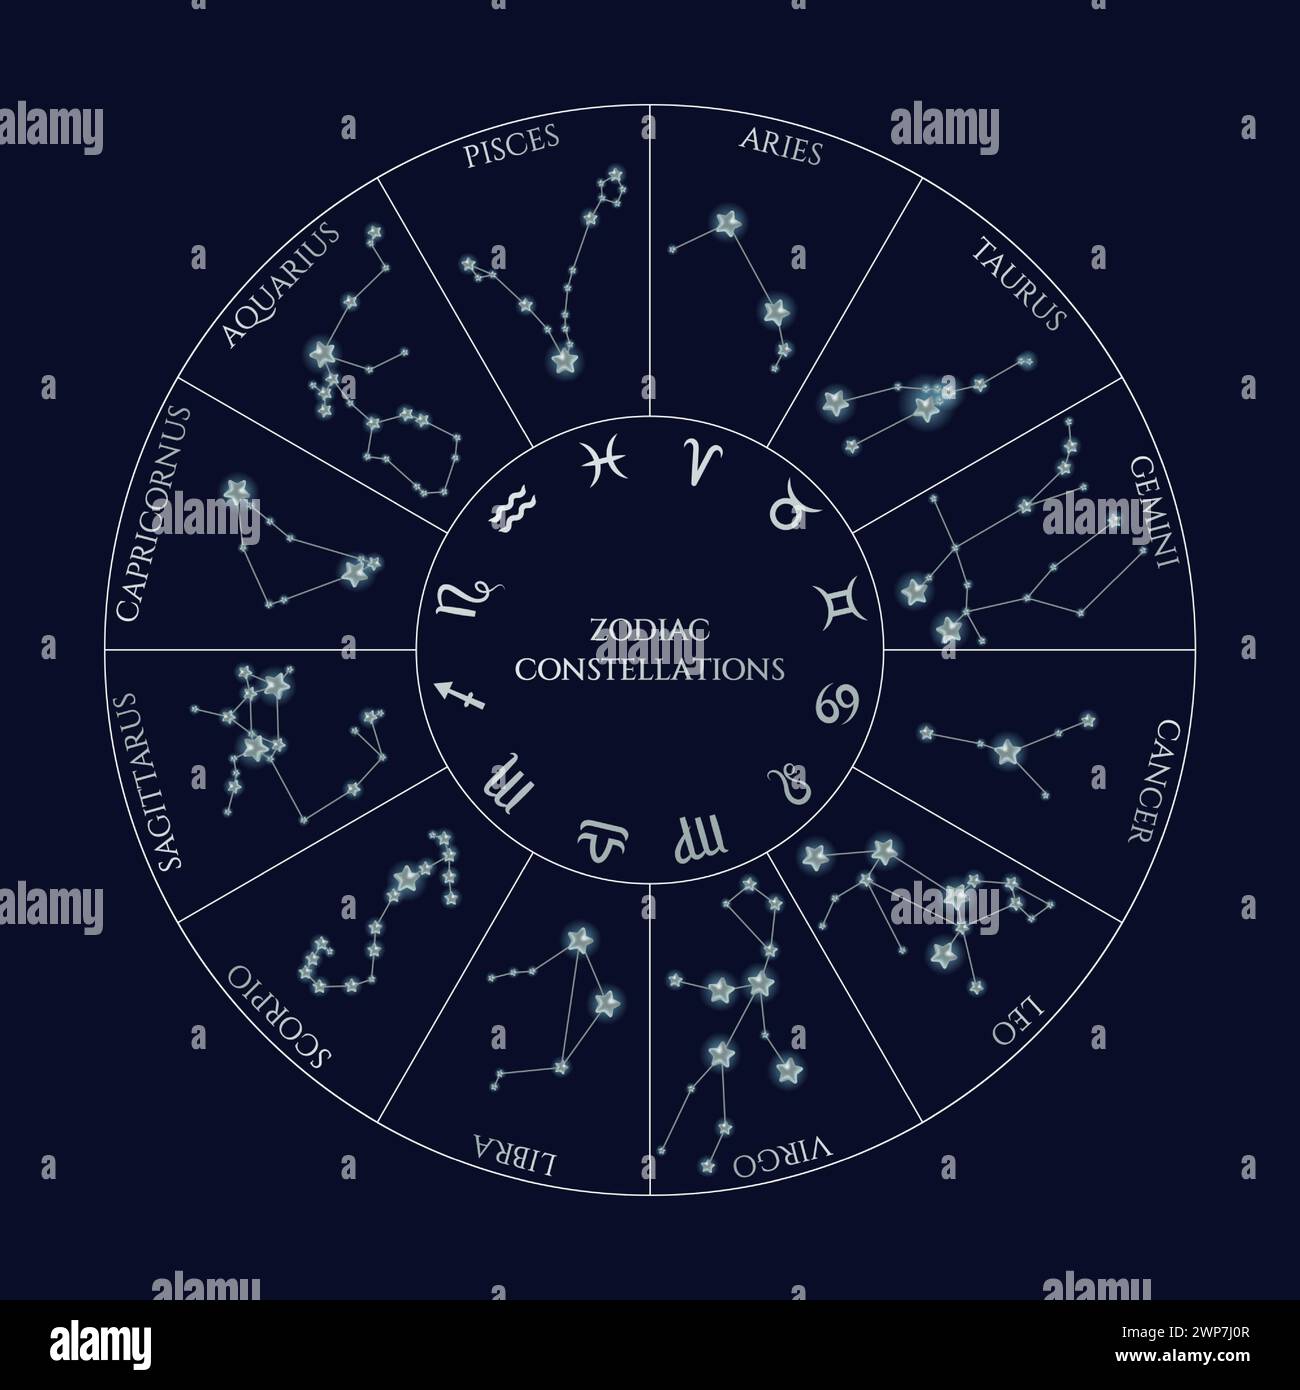 Zodiac constellations in a circle vector illustration design. Silver stars, horoscope collection and astrological signs. Stock Vector